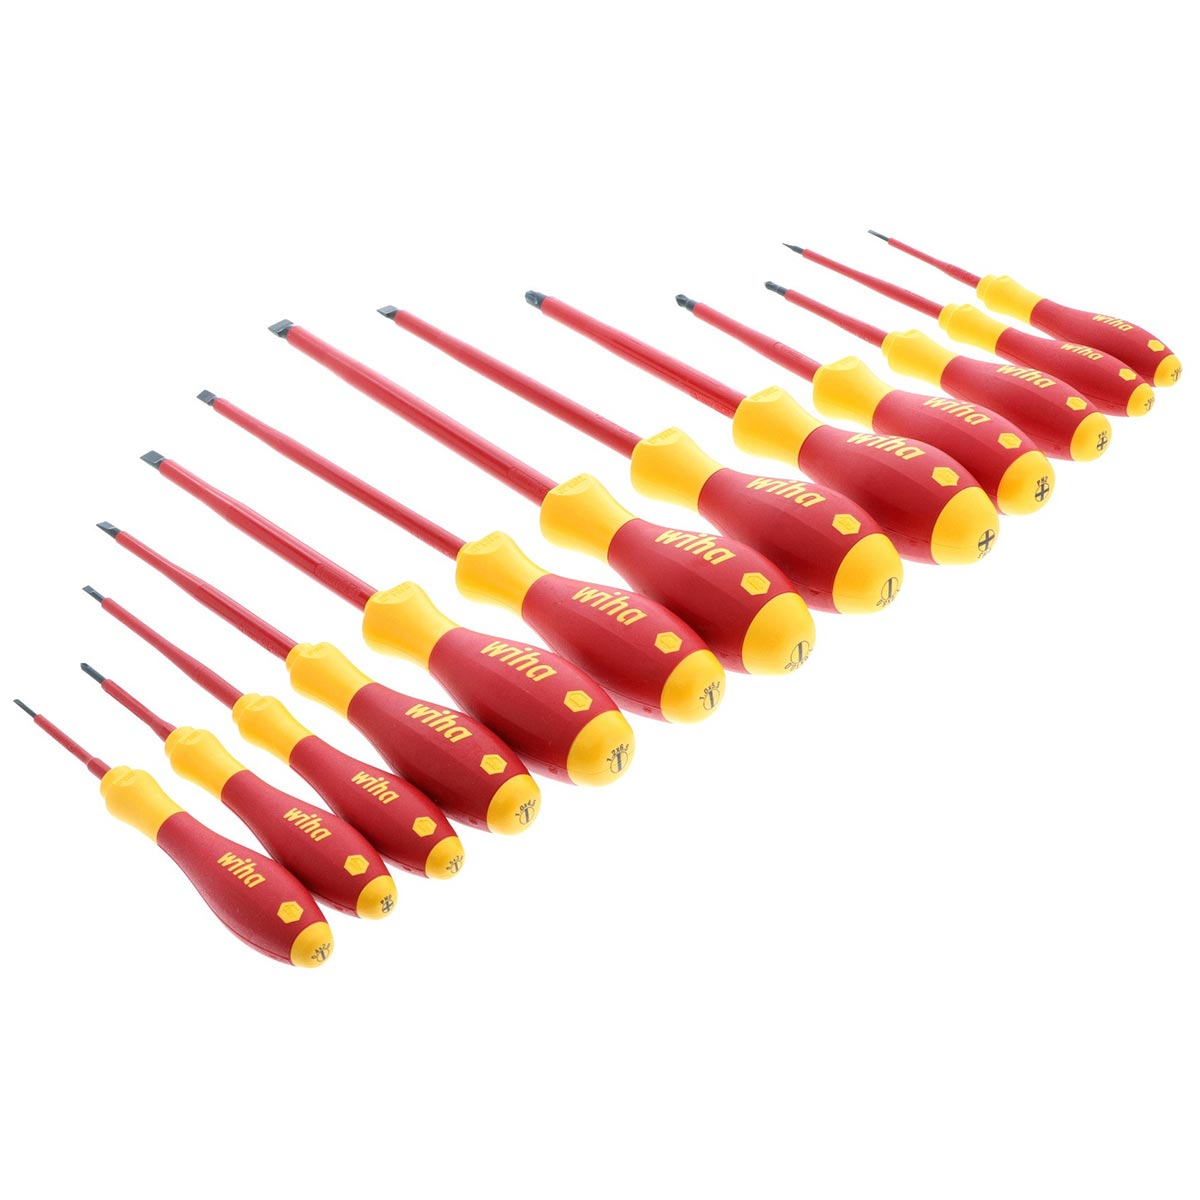 Wiha 32094 Insulated Cushioned Grip Slotted/Phillips Screwdrivers - 13 Piece Set